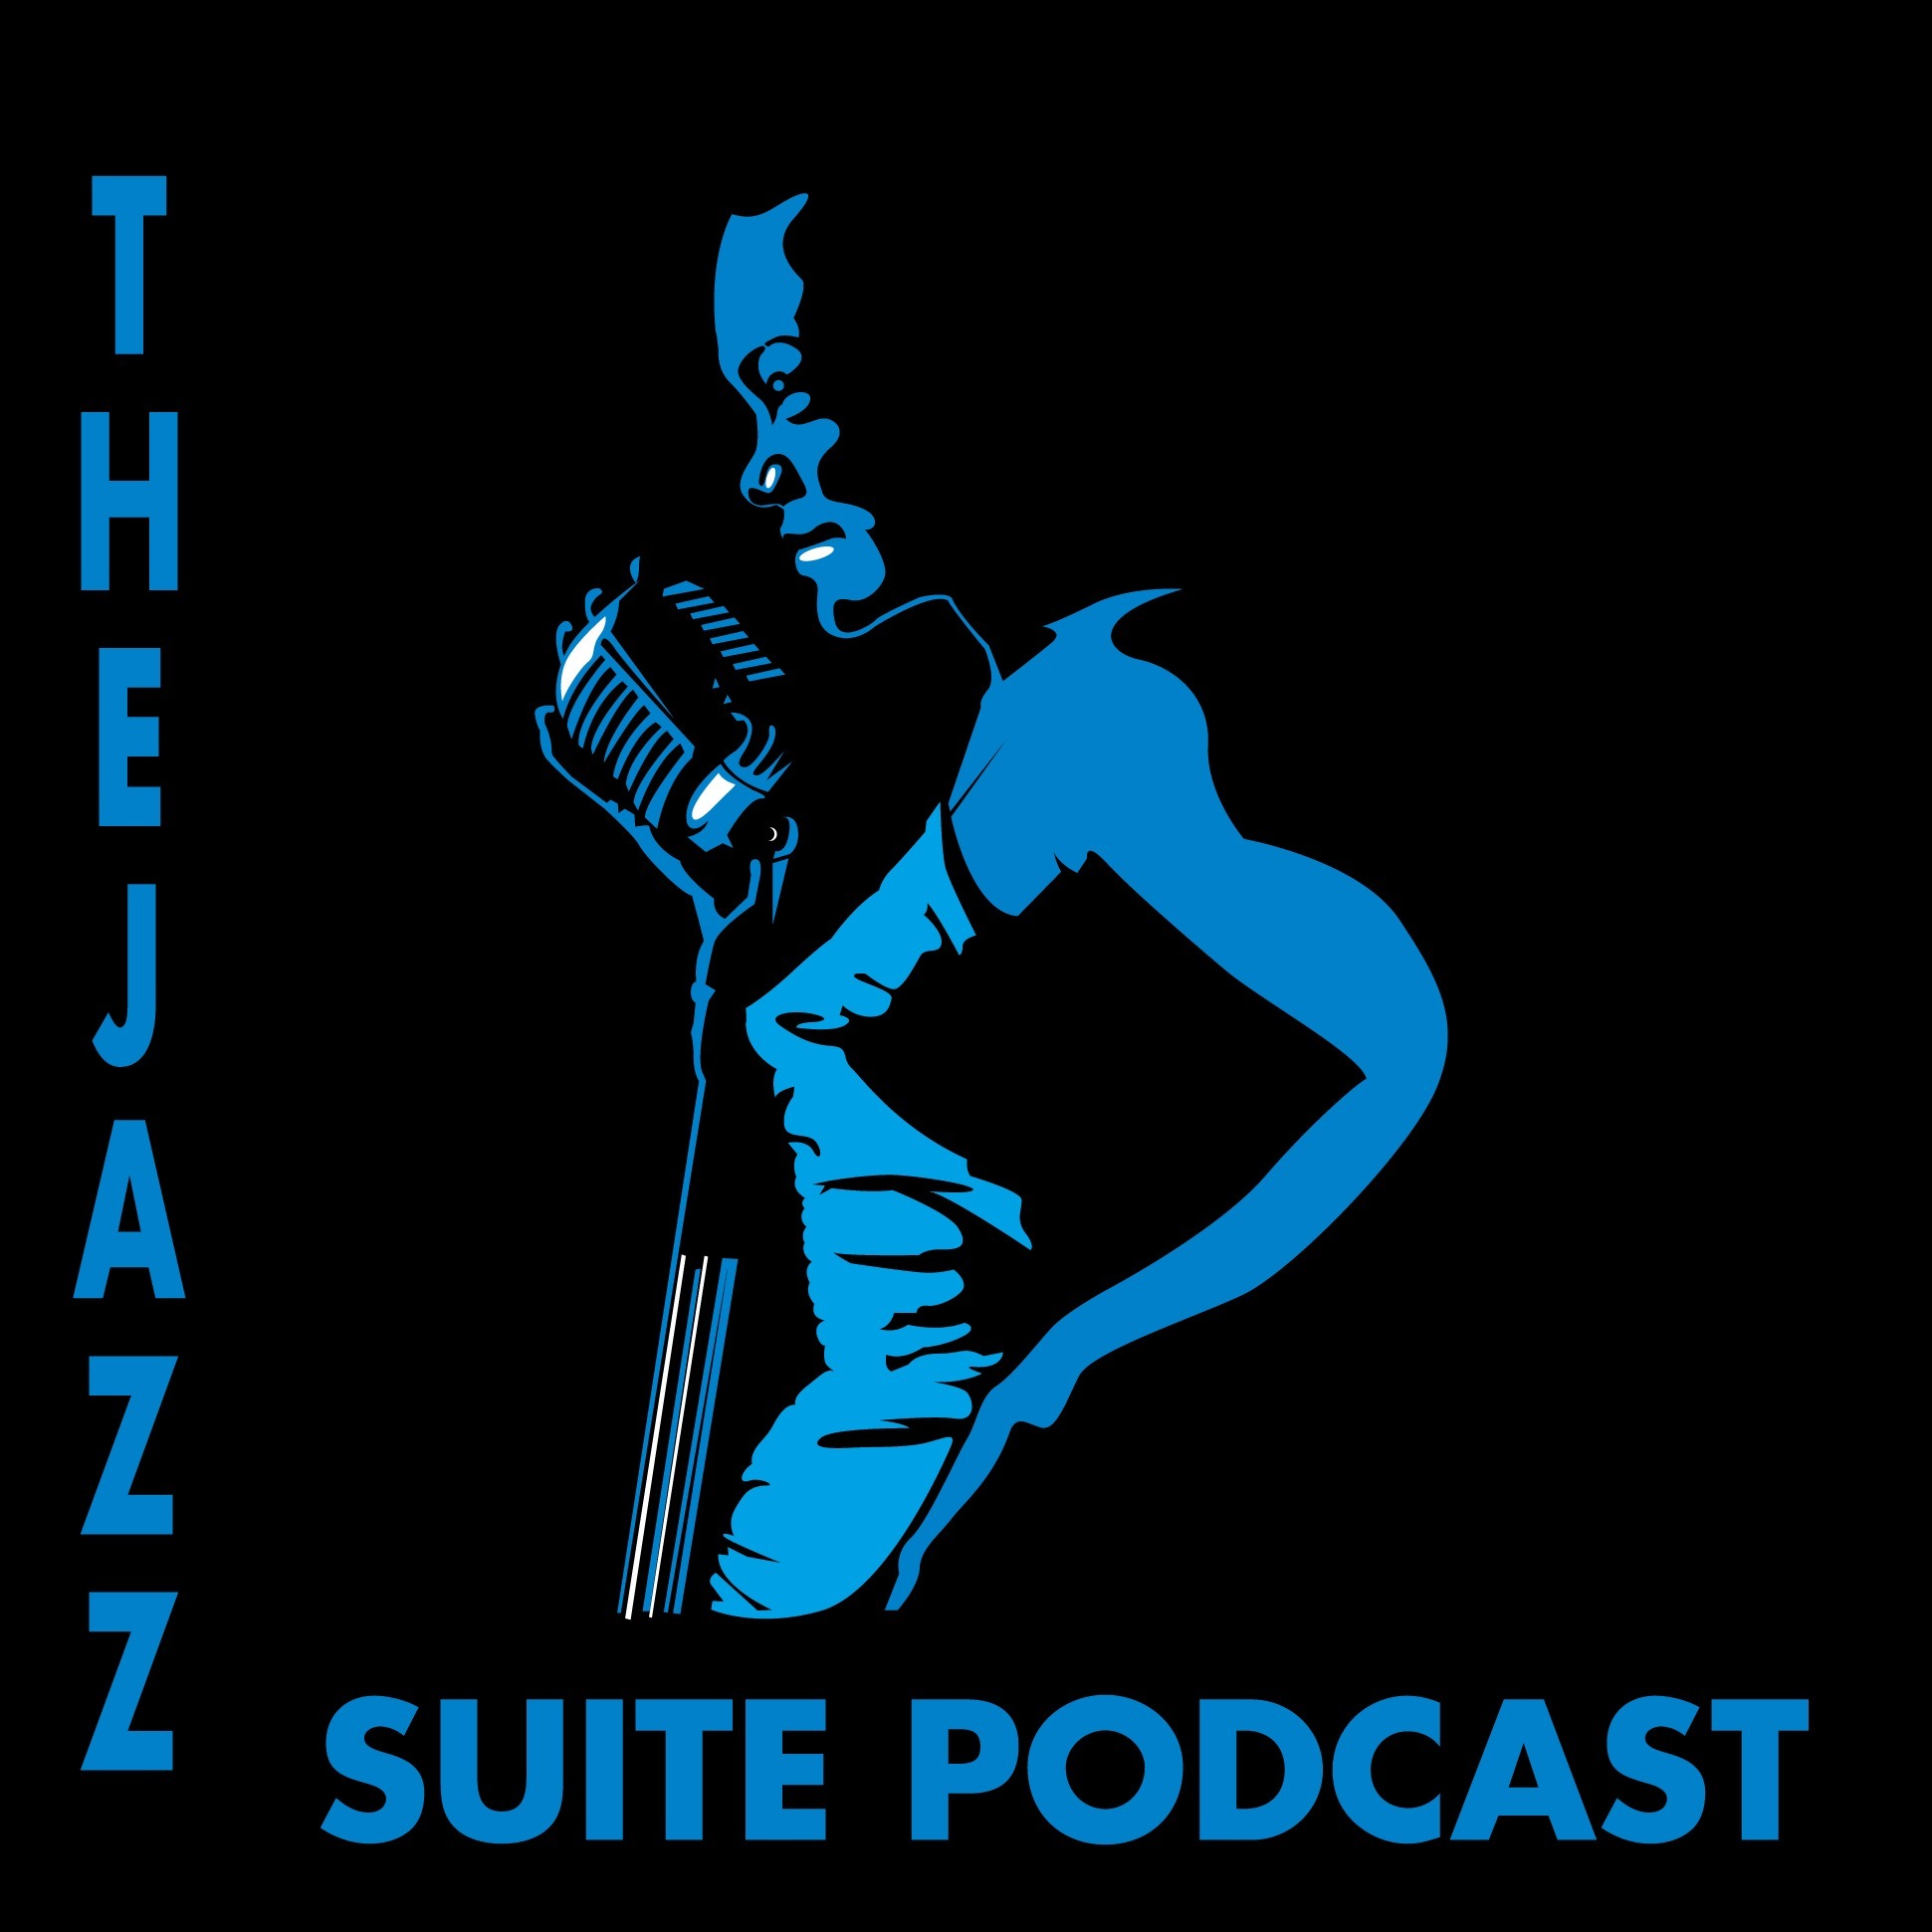 The Jazz Suite Podcast Show #457